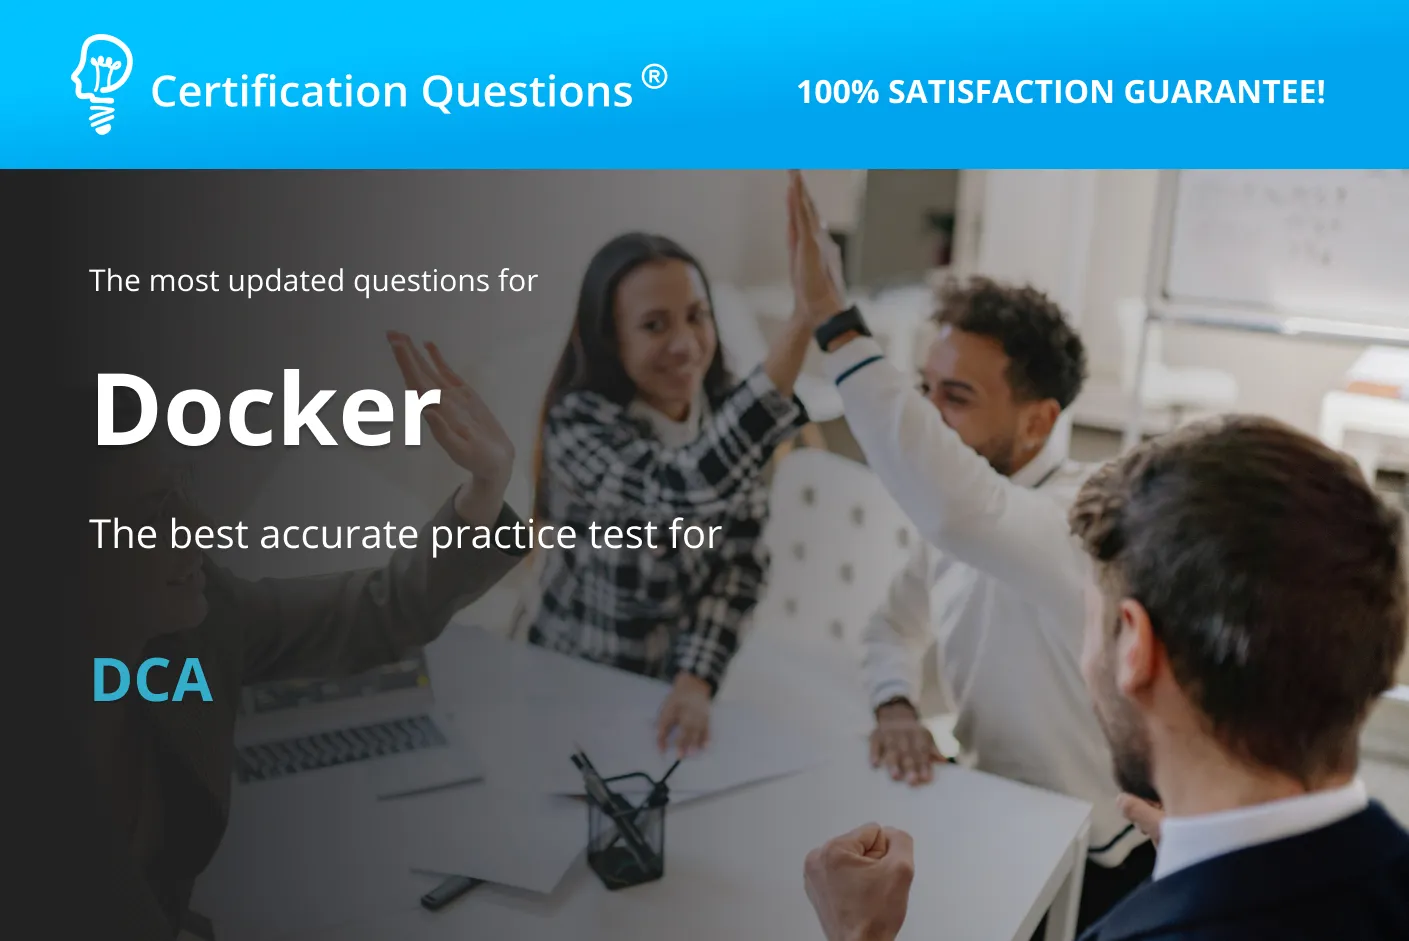 This image is related to docker certified associate exam questions